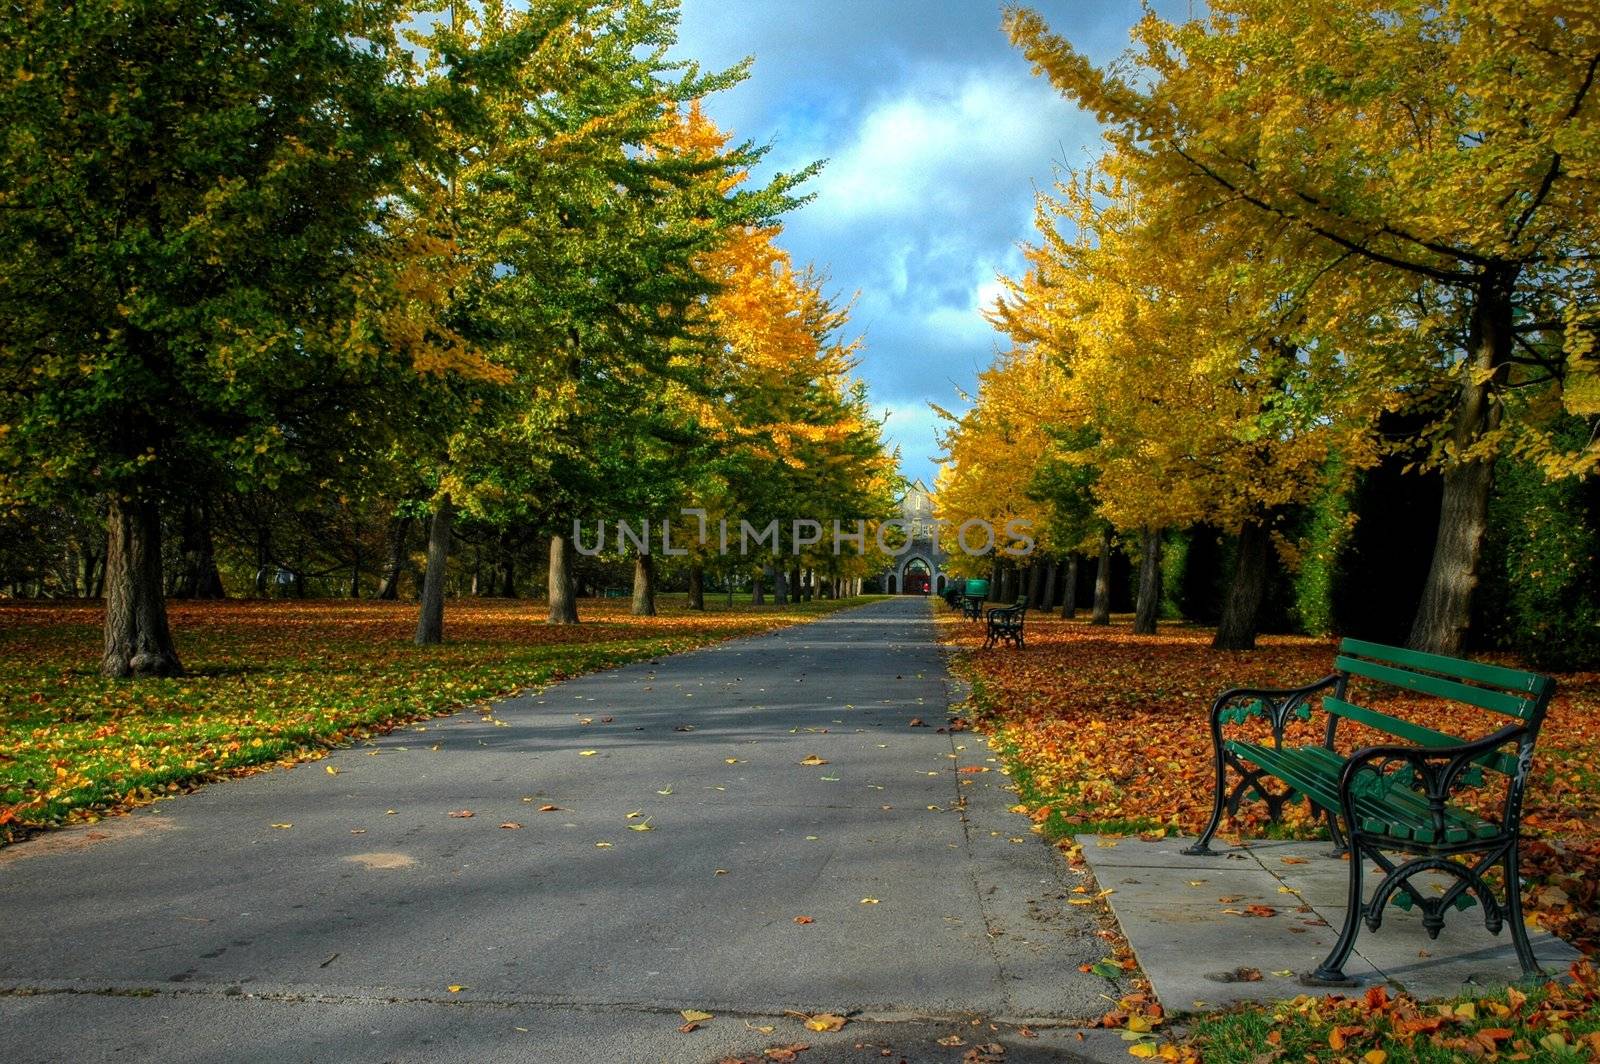 bute park in cardiff with beautiful autumn colours of trees and bench